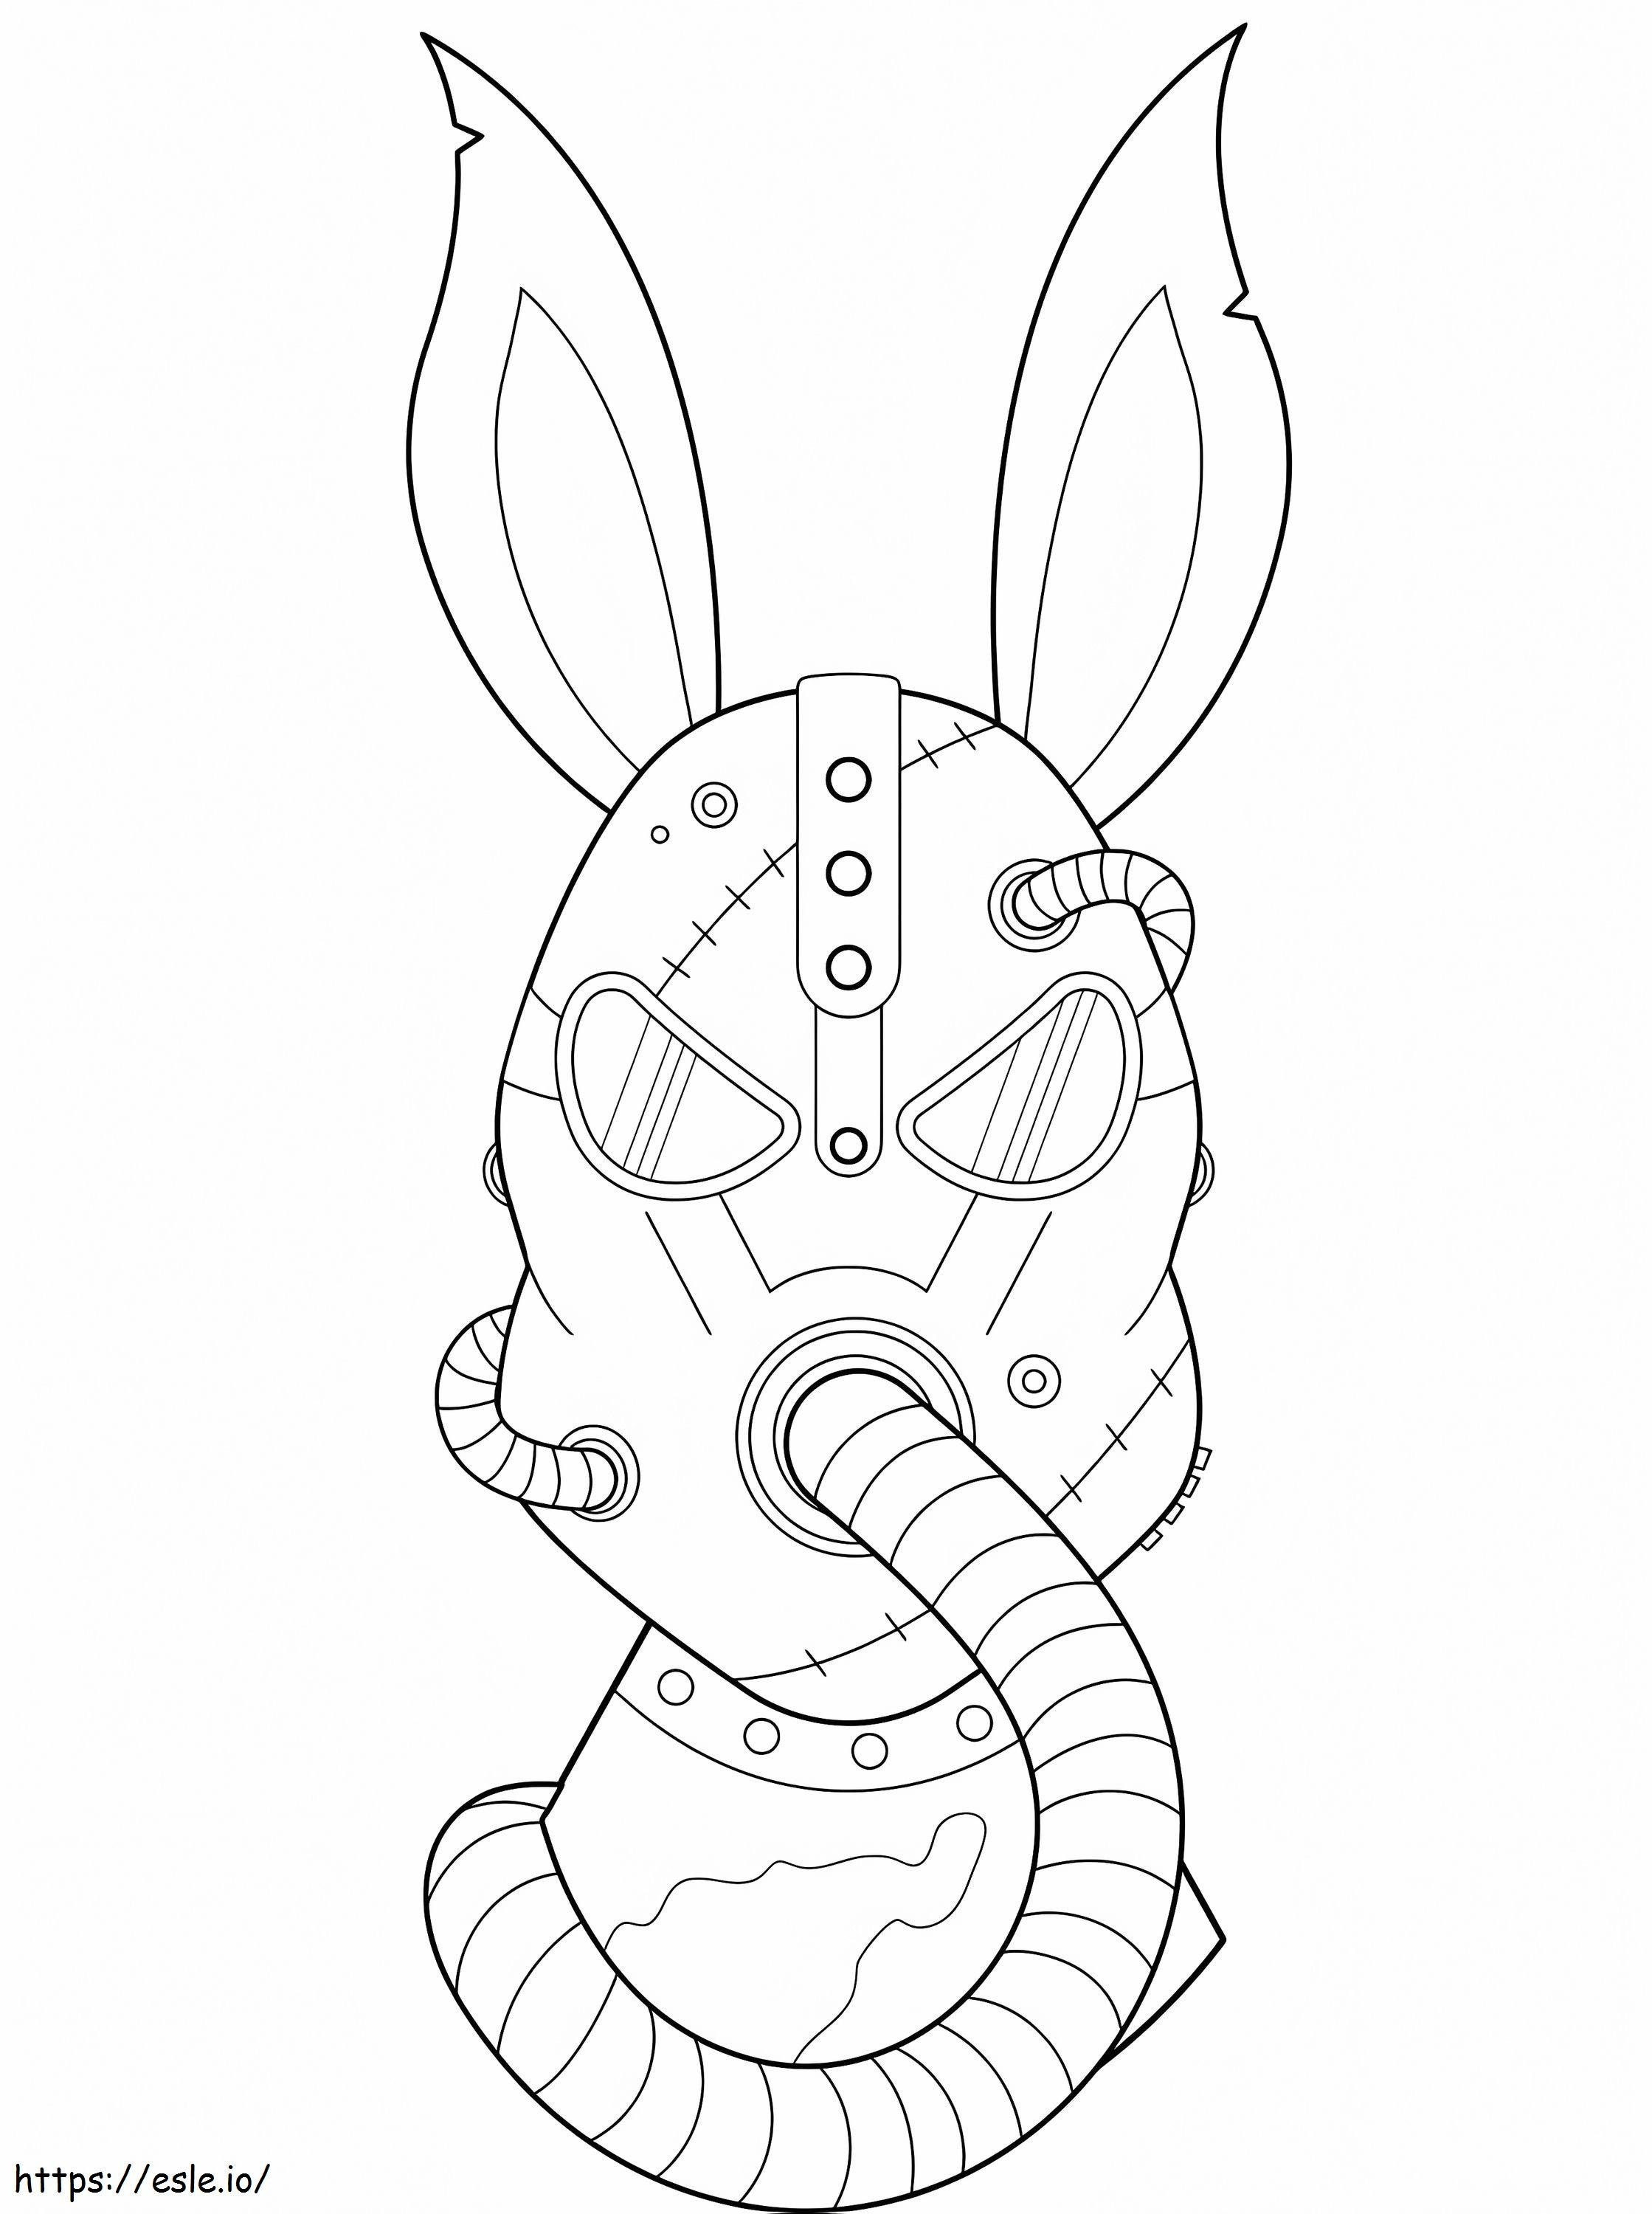 1597968760 Steampunk Rabbit coloring page